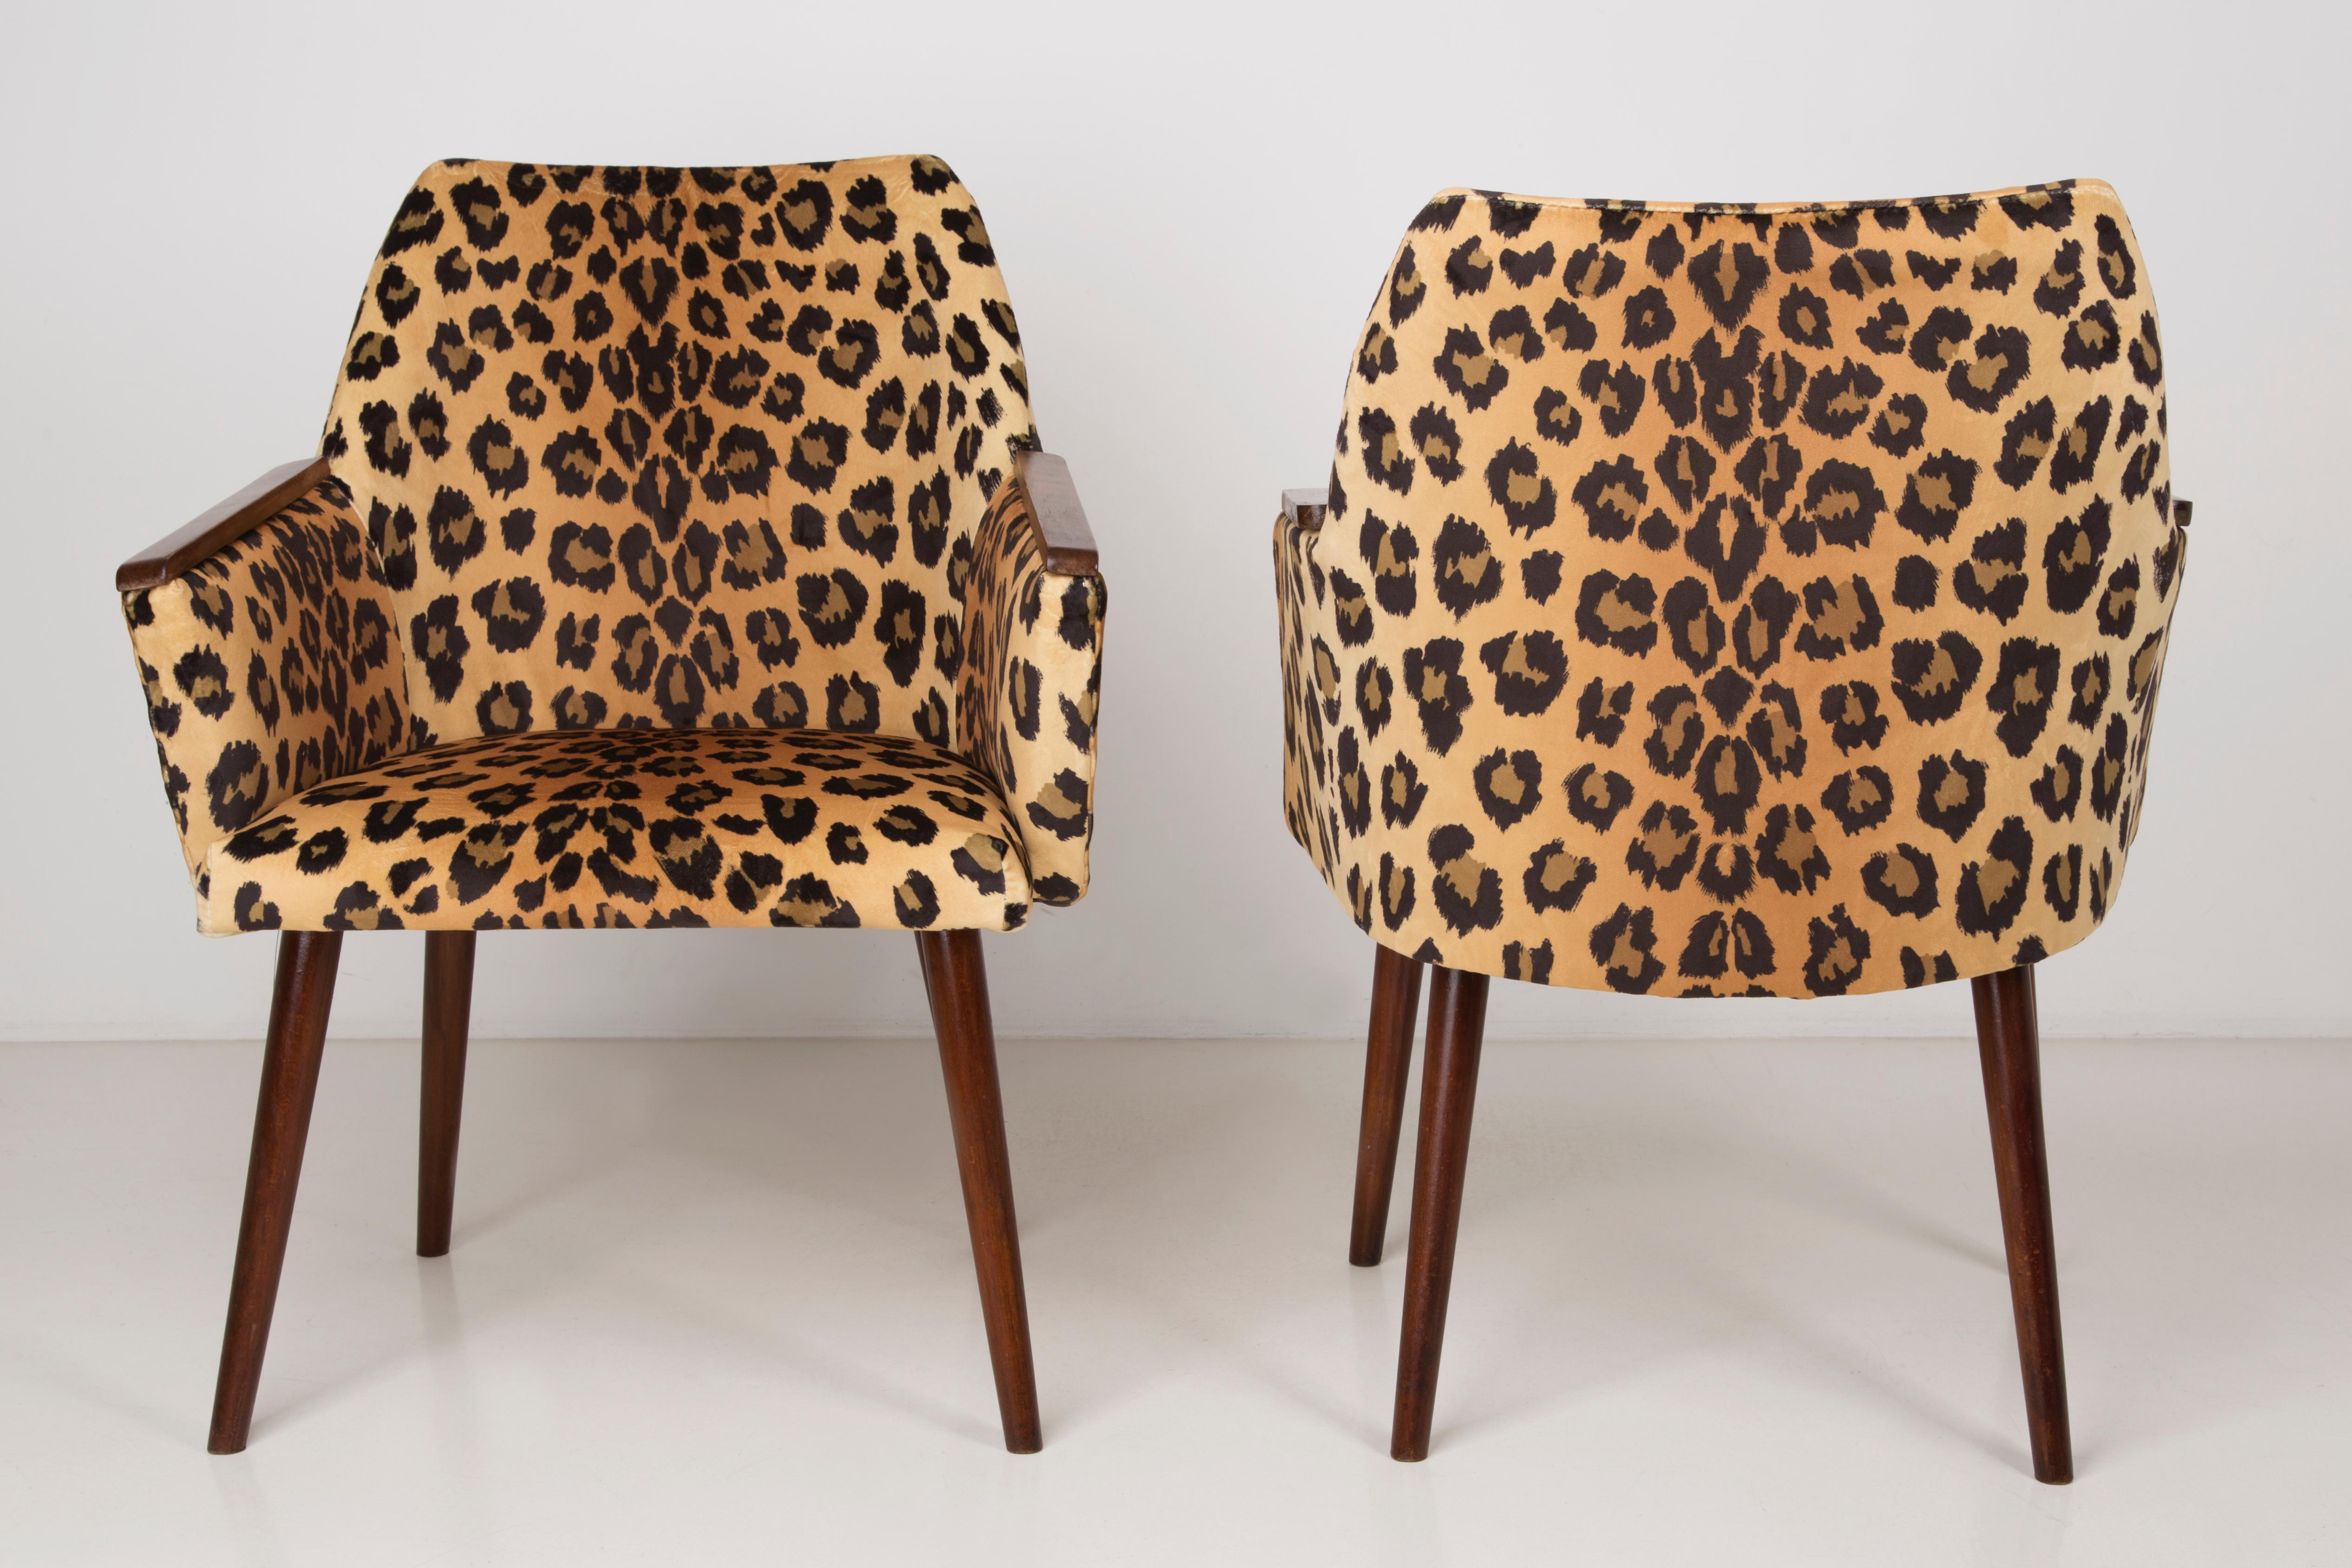 Set of Two Mid-Century Modern Leopard Print Chairs, 1960s, Germany 5